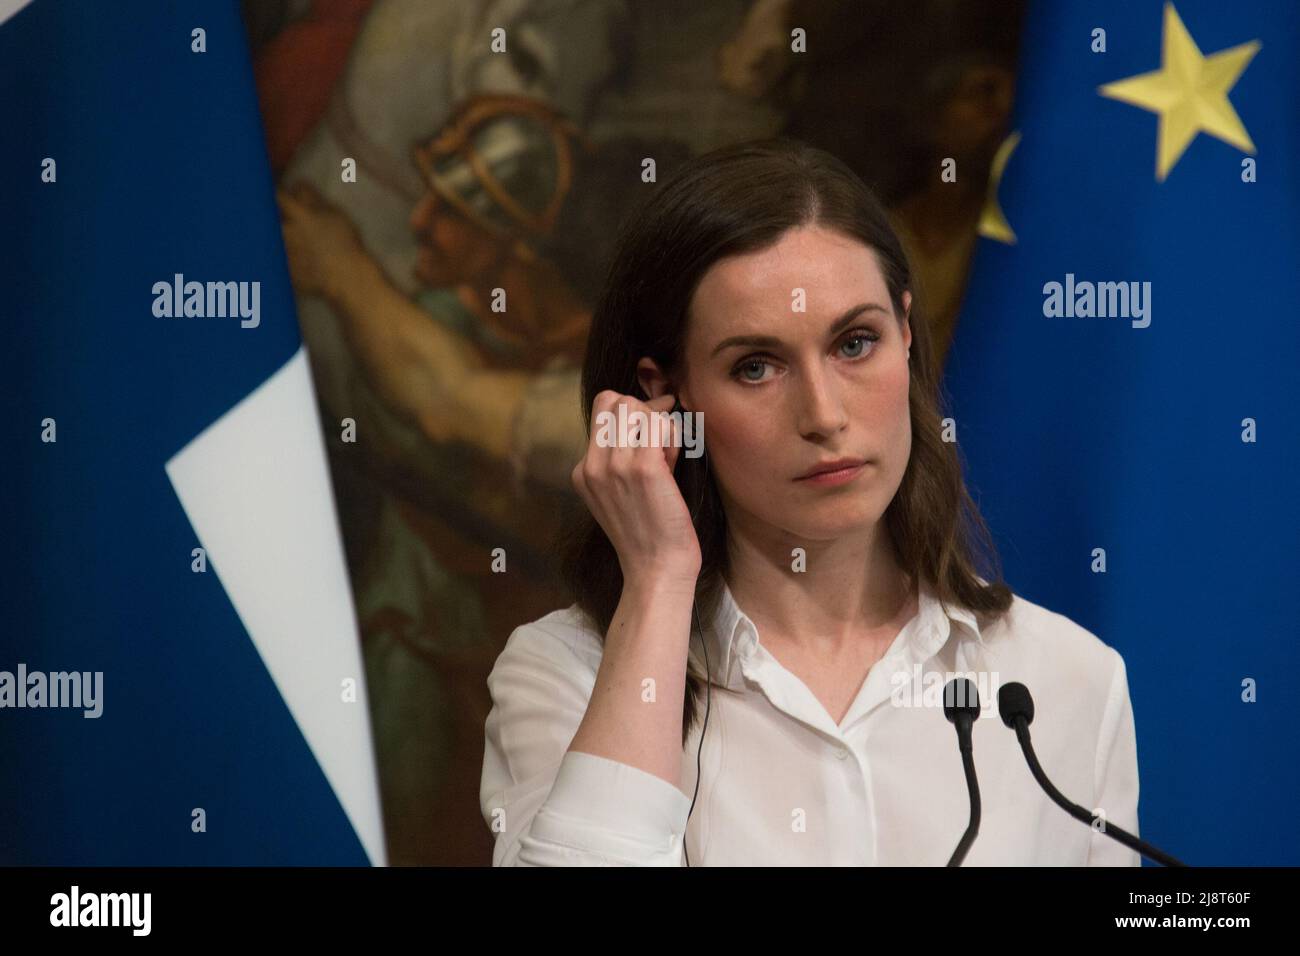 Rome, Italy. 18th May, 2022. The Italian Prime Minister Mario Draghi meets the Prime Minister of Finland Sanna Marin At Palazzo Chigi. Today, Finland, along with Sweden, has formally applied to join NATO, which Italy is already part of. Credit: LSF Photo/Alamy Live News Stock Photo